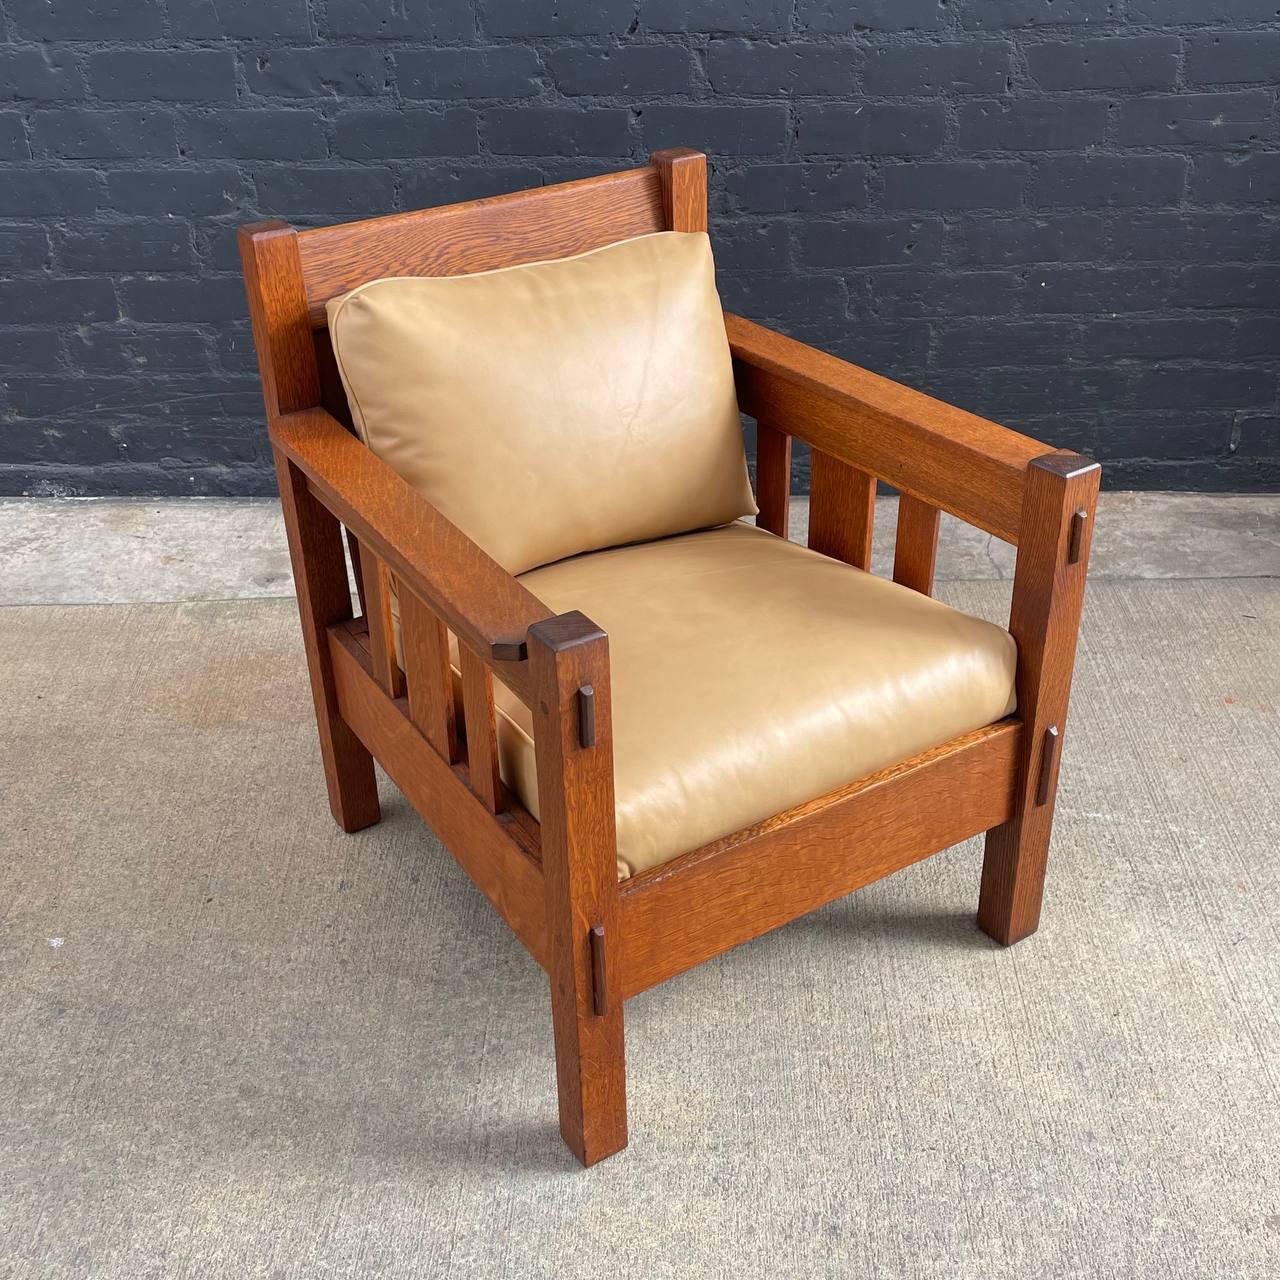 1920s Arts & Crafts Mission Oak & Leather Lounge Chair by Stickley
Maker: Stickley
Country: United States
Materials: Oak Wood, New Leather Upholstery
Condition: Newly Reupholstered
Style: Arts & Crafts
Year: 1920s
$4,500
Dimensions
34.50”H x